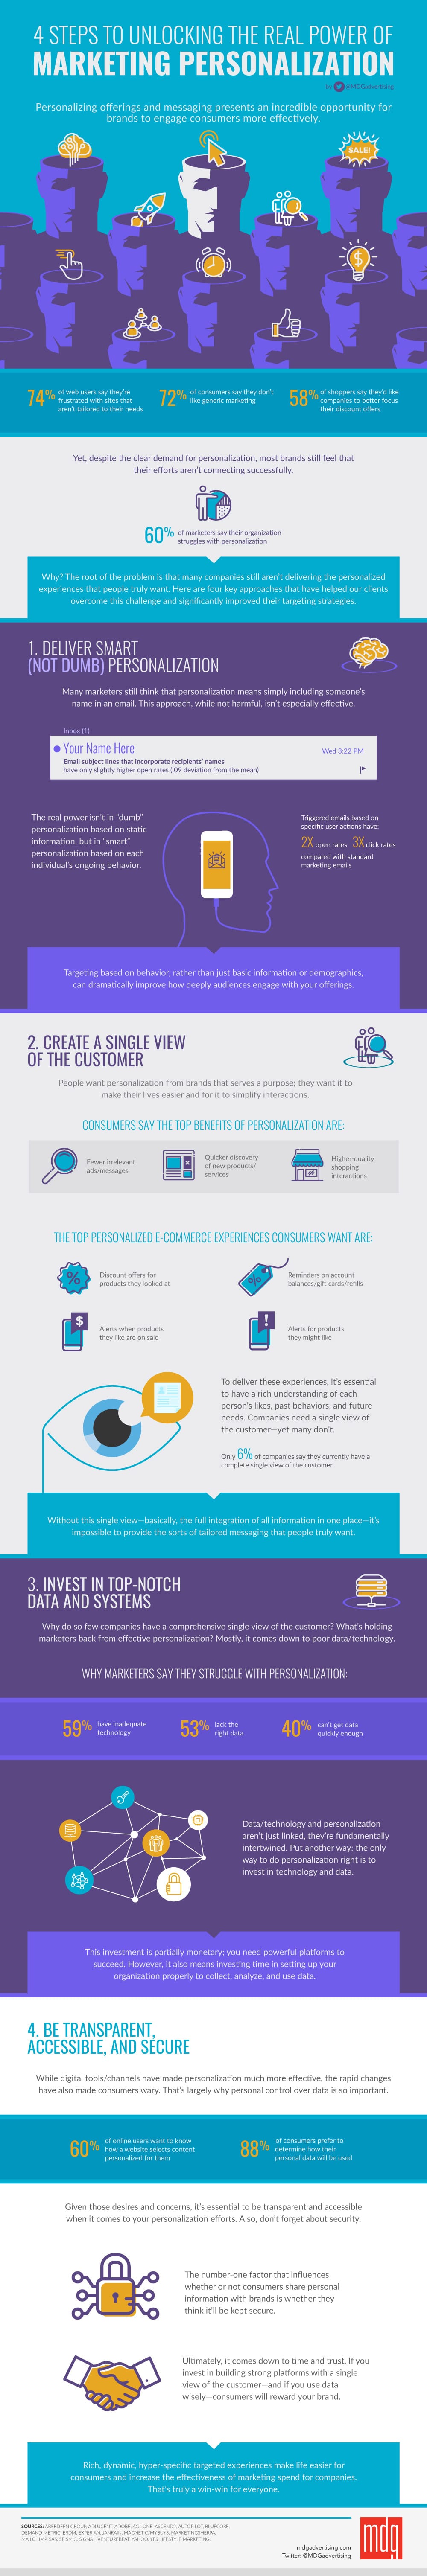 Marketing Personalization: 4 Steps To Unlocking Its Power [Infographic]